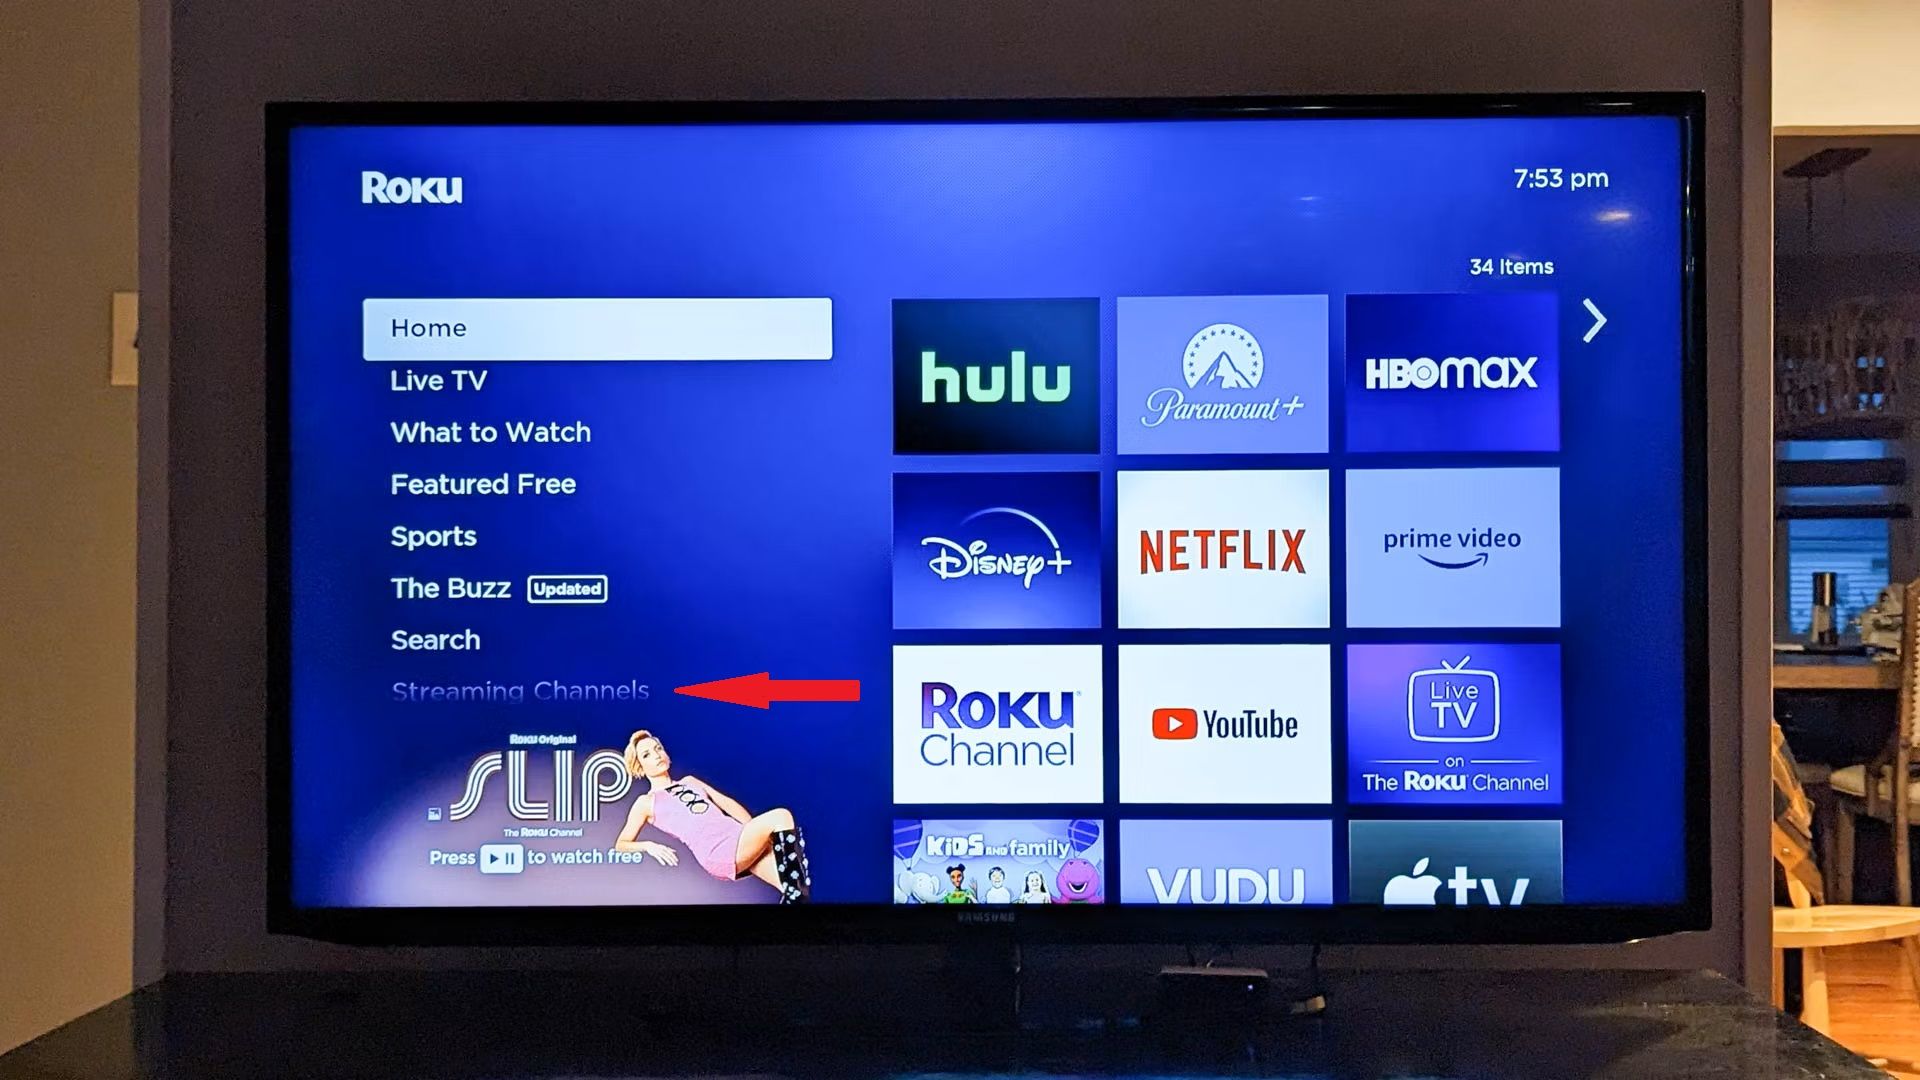 Click streaming channels on the Roku home screen 